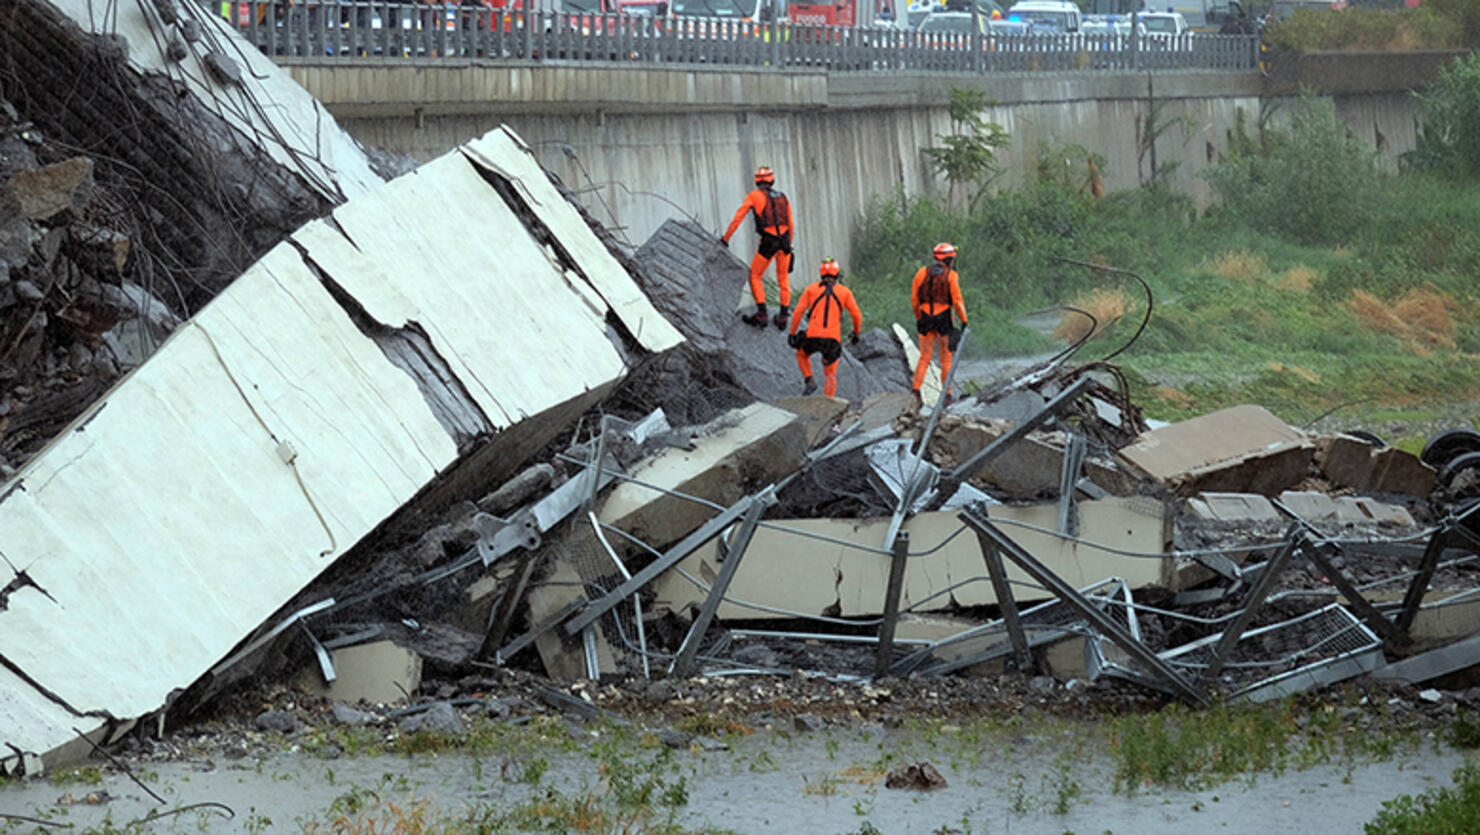 Rescuers are at work, on August 14, 2018 in Genoa, at a section of a giant motorway bridge that collapsed earlier injuring several people